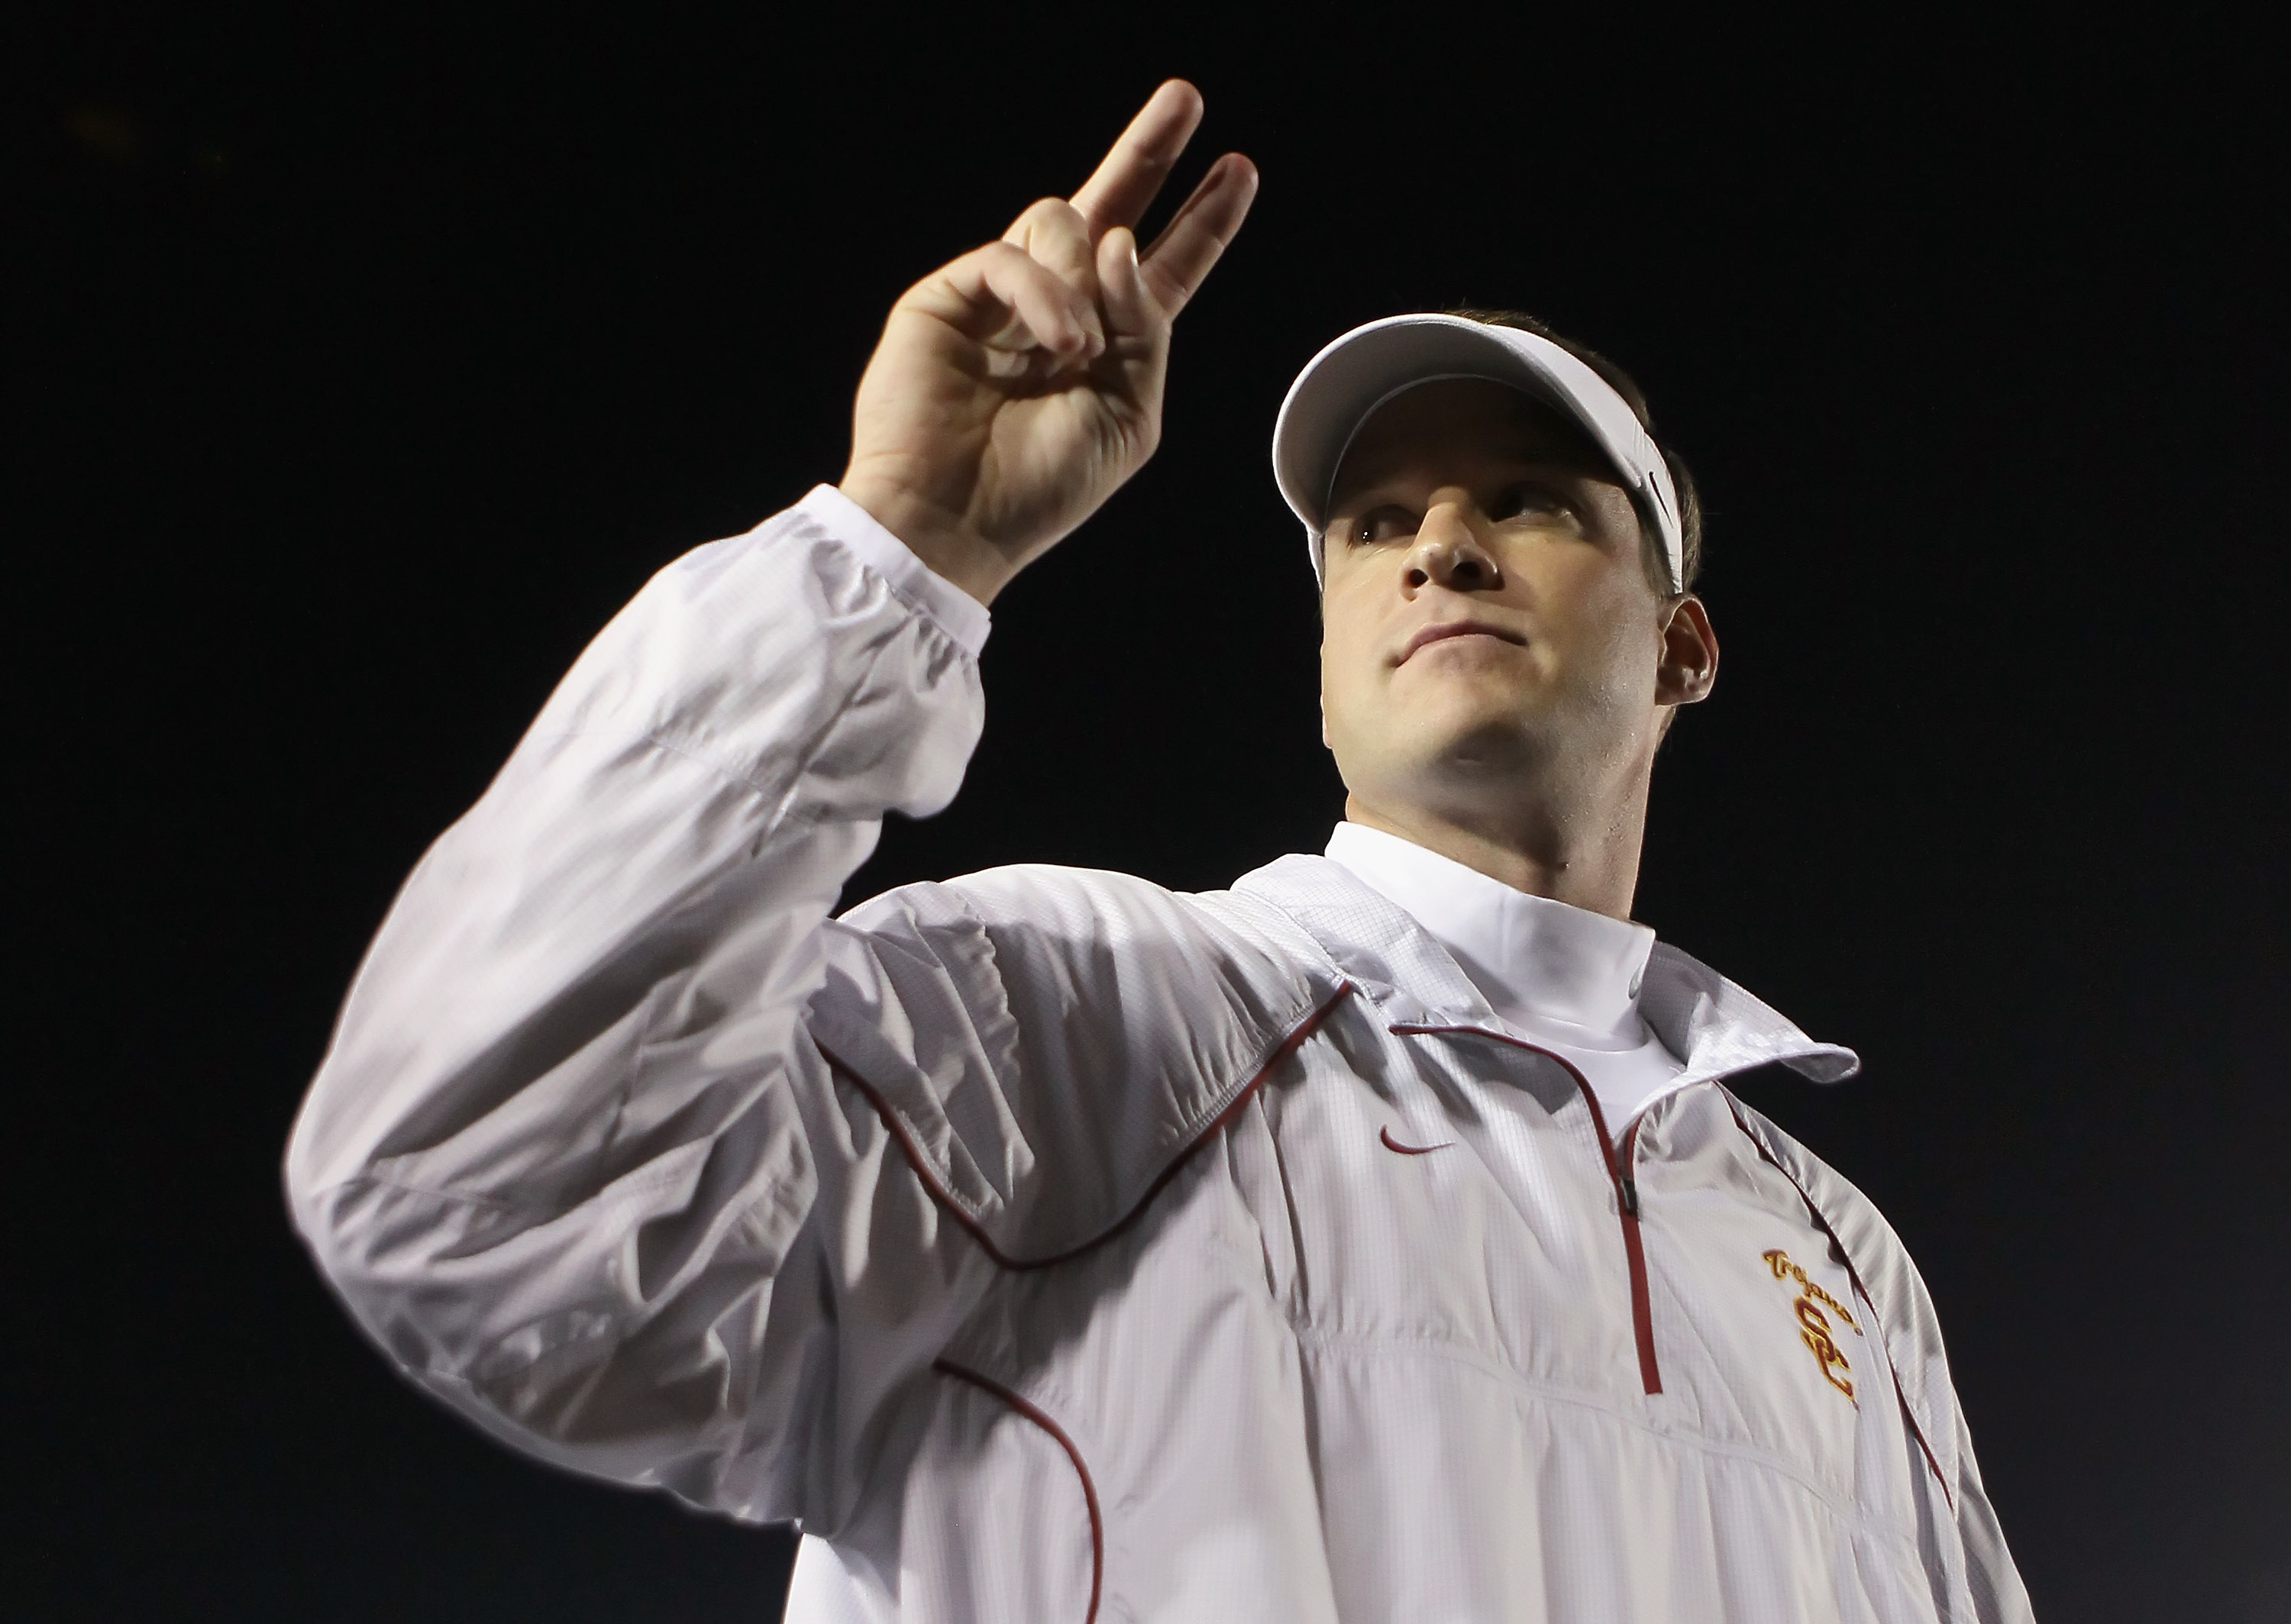 PASADENA, CA - DECEMBER 04:  USC Trojans head coach Lane Kiffin celebrates following his teams victory over the UCLA Bruins at the Rose Bowl on December 4, 2010 in Pasadena, California.  USC defeated UCLA 28-14.  (Photo by Jeff Gross/Getty Images)